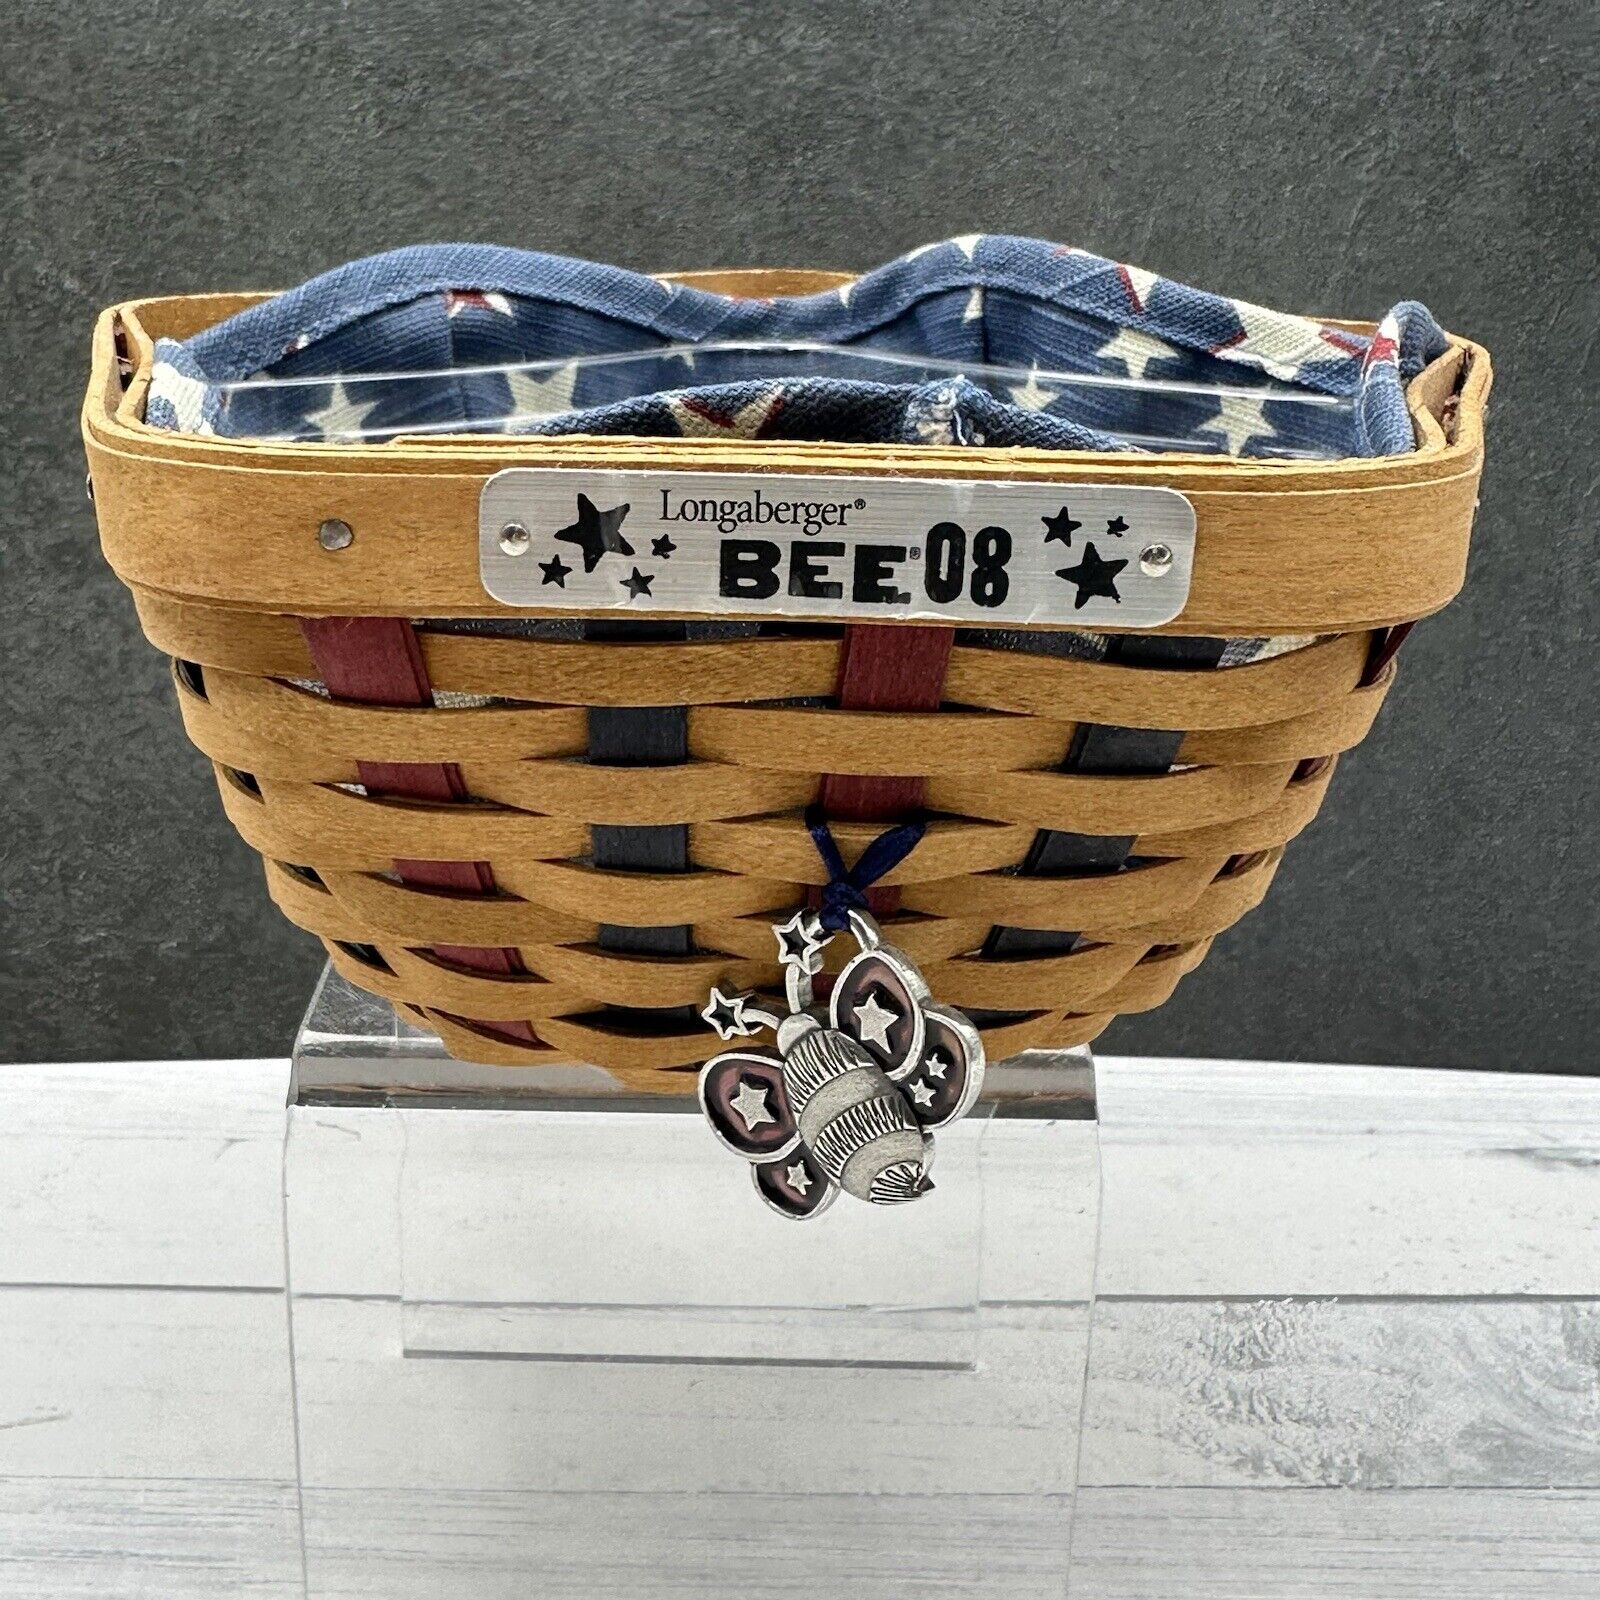 Longaberger 2008 Bee Basket Blue Red Accent Weave Star Shaped Protector